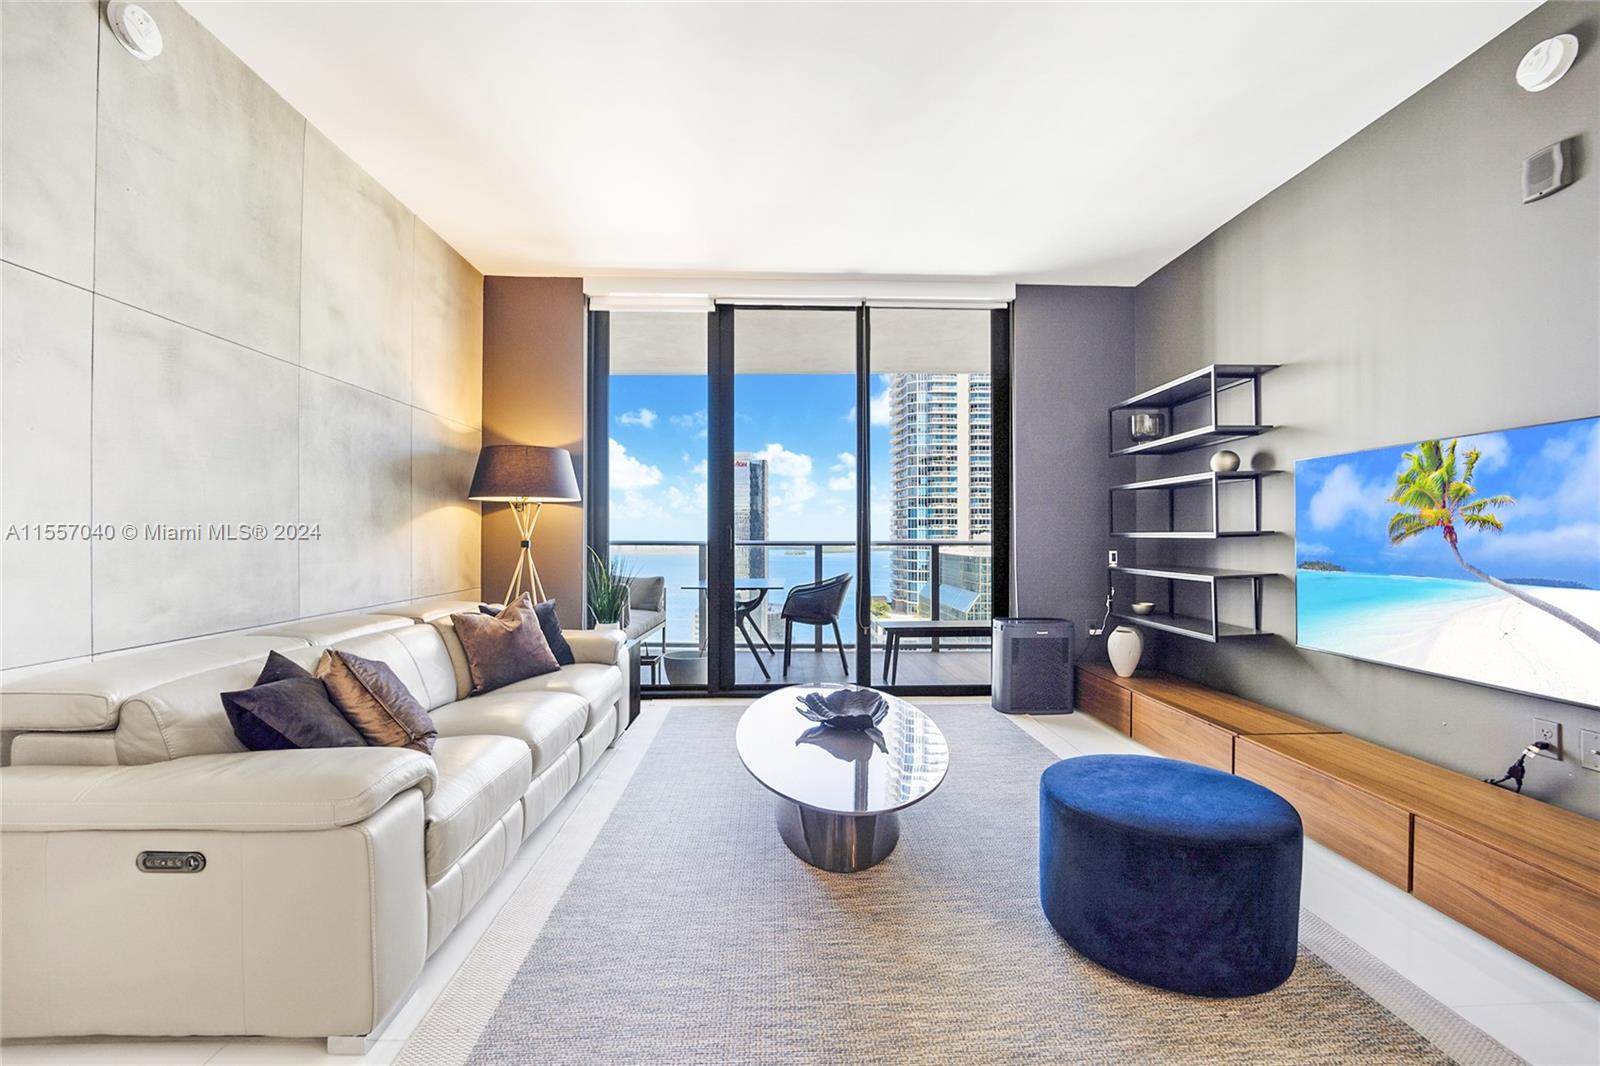 Spectacular 2 beds + den and 3 full baths unit with private elevator and panoramic view of the Miami Skyline and Bay. Building amenities include an indoor heated swimming pool, a full-service spa, roof top pool, kids playground and much more!